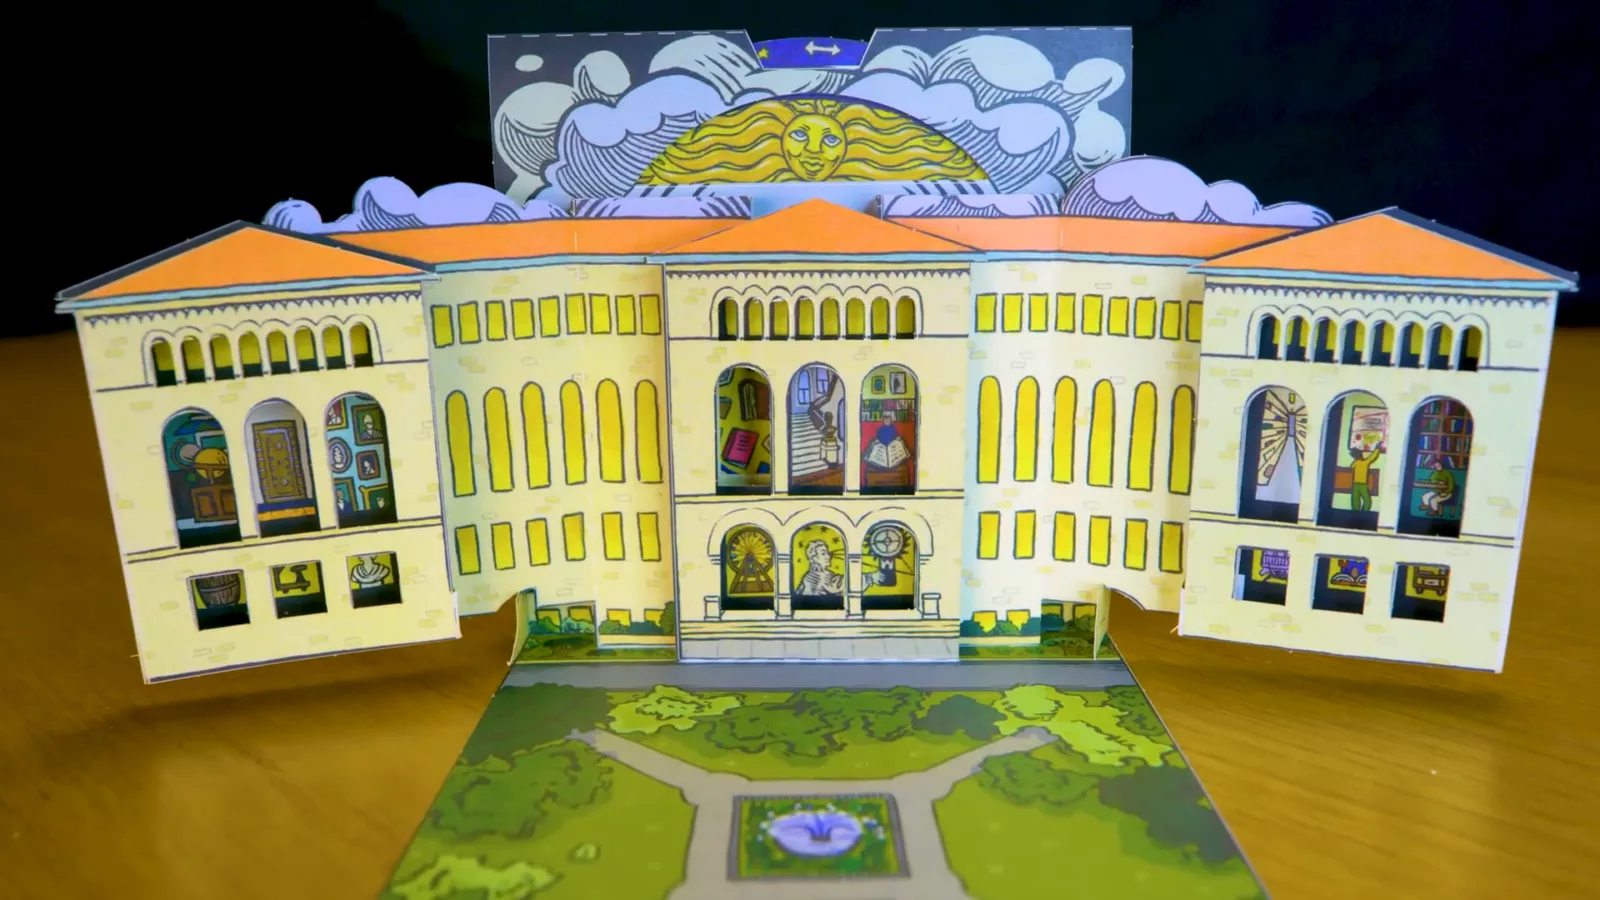 A pop-up book version of the Newberry Library mimics the library’s architecture. Details related to the Newberry are visible inside the windows of the three-dimensional paper sculpture.